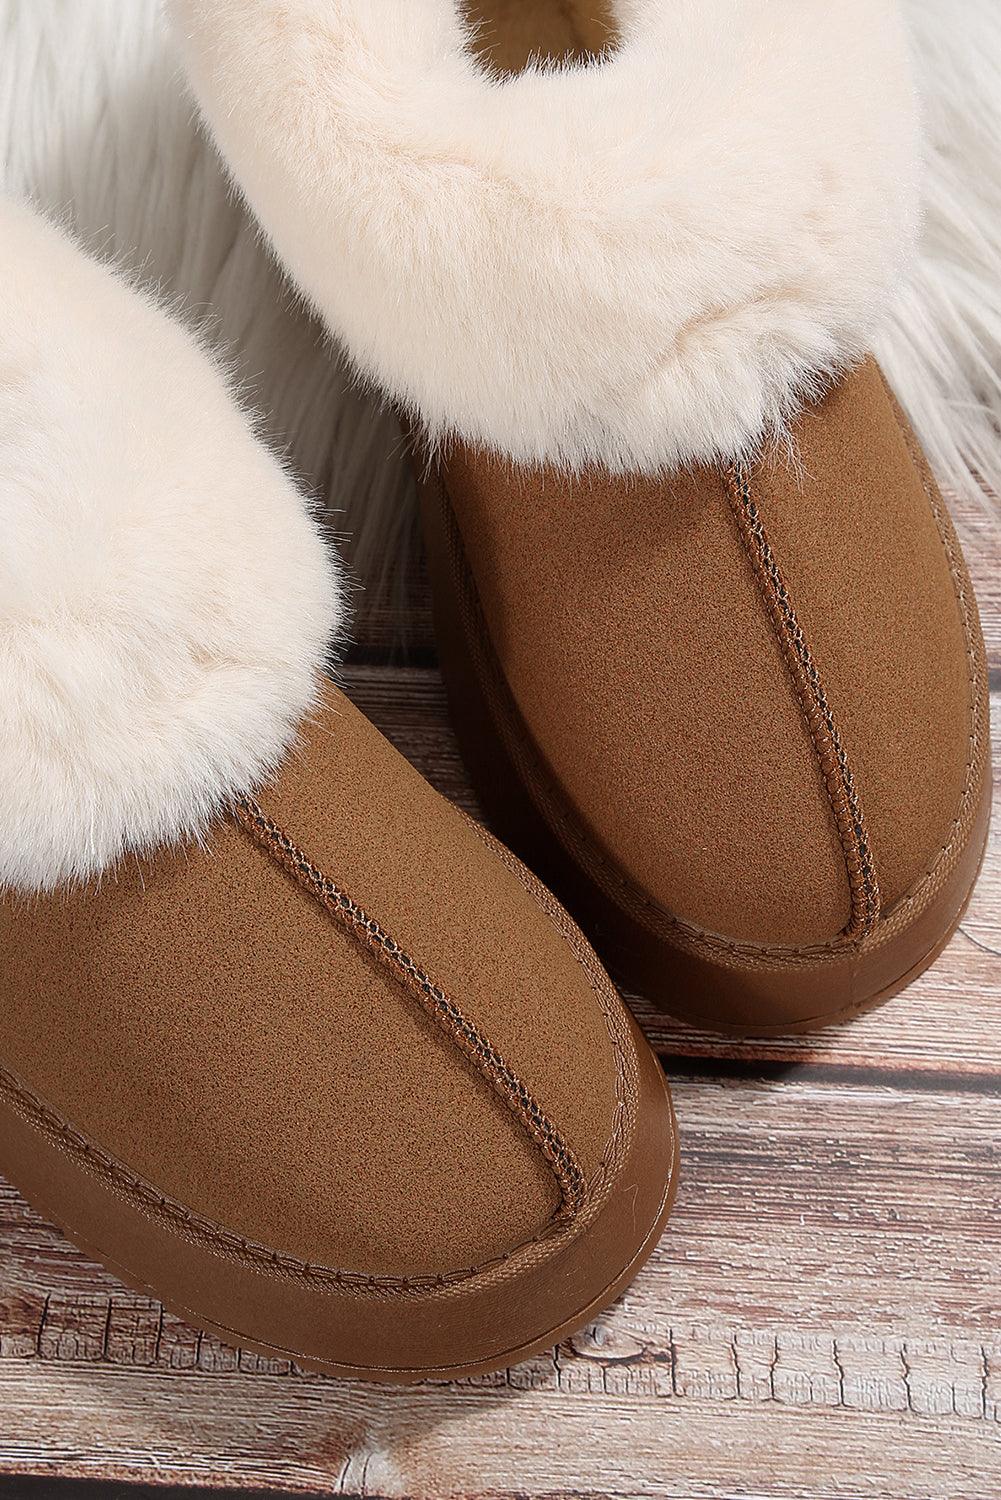 Suede Contrast Print Plush Lined Snow Boots - God's Girl Gifts And Apparel